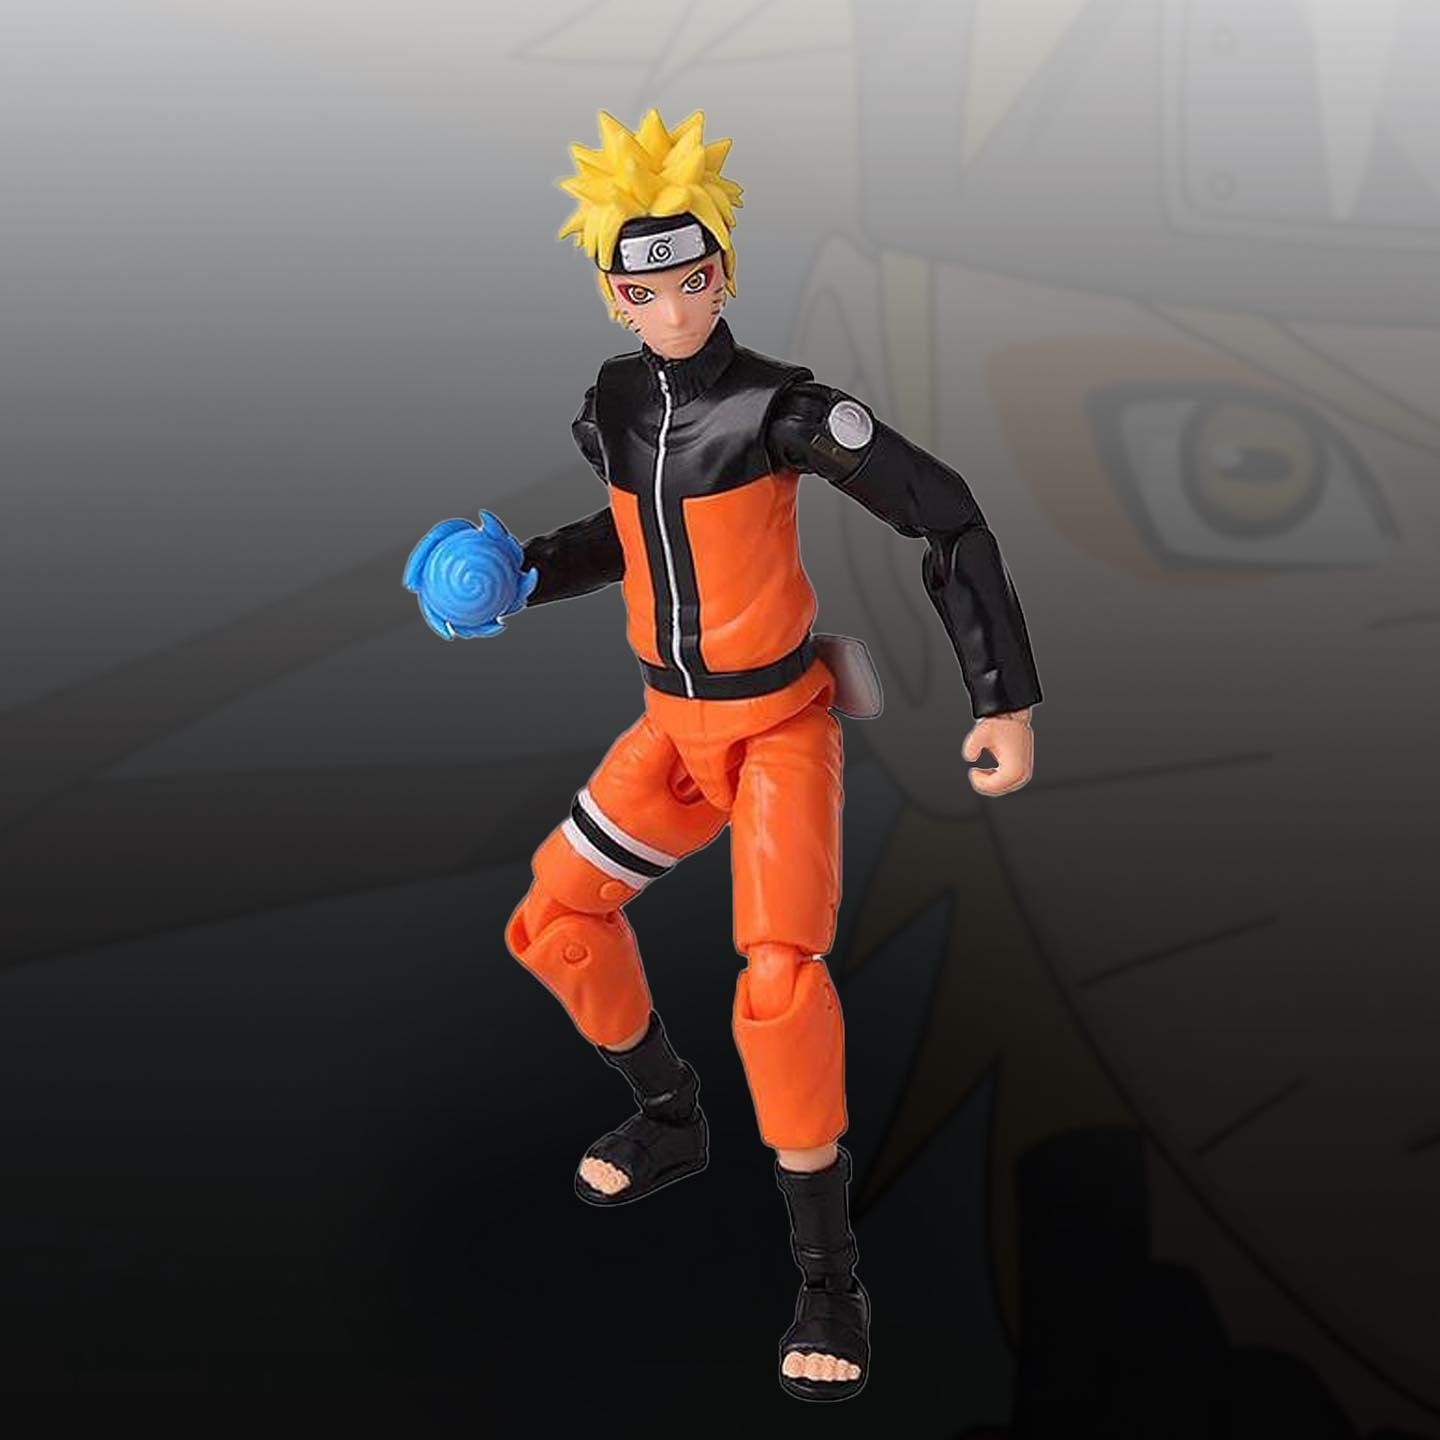 Naruto fans can now imagine...